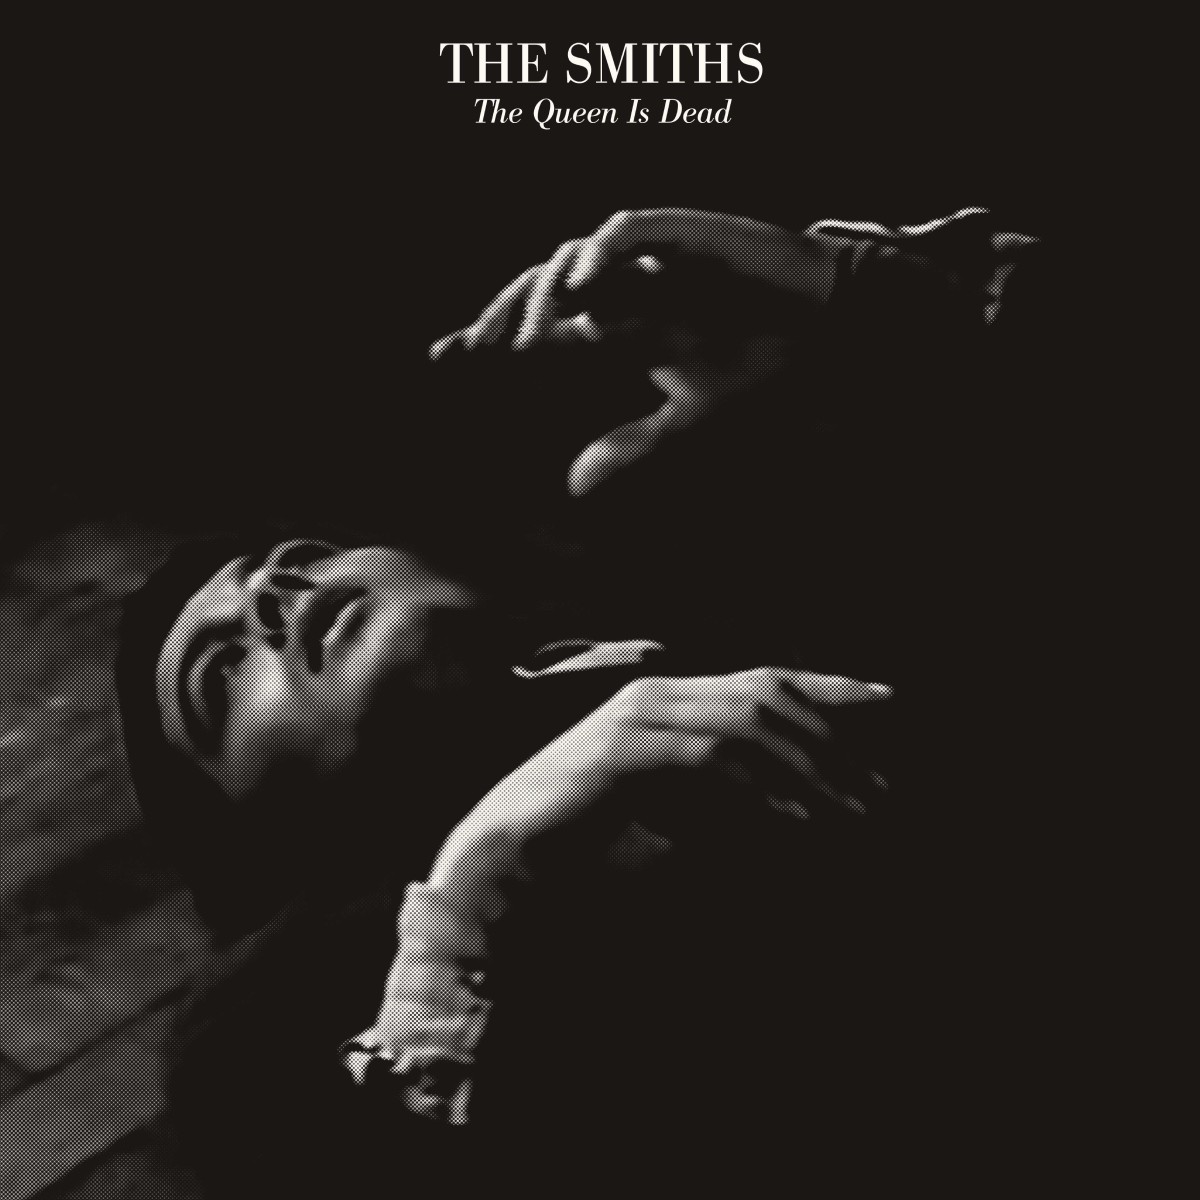 The Queen Is Dead (1986) - The Smiths (Albumcover)